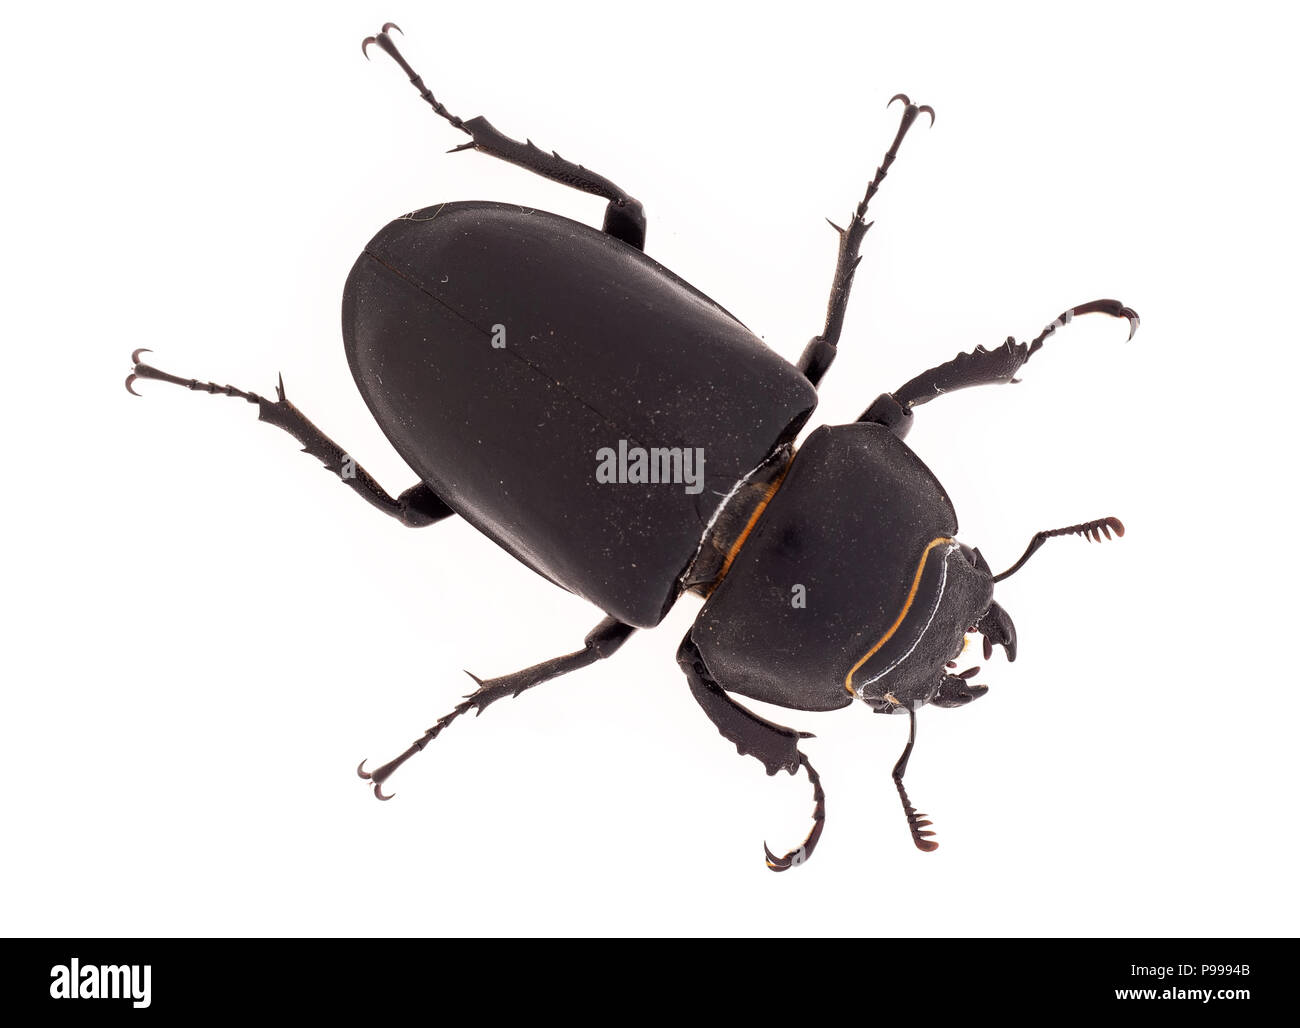 Lesser Stag Beetle, Dorcus parallelipipedus on white background Stock Photo